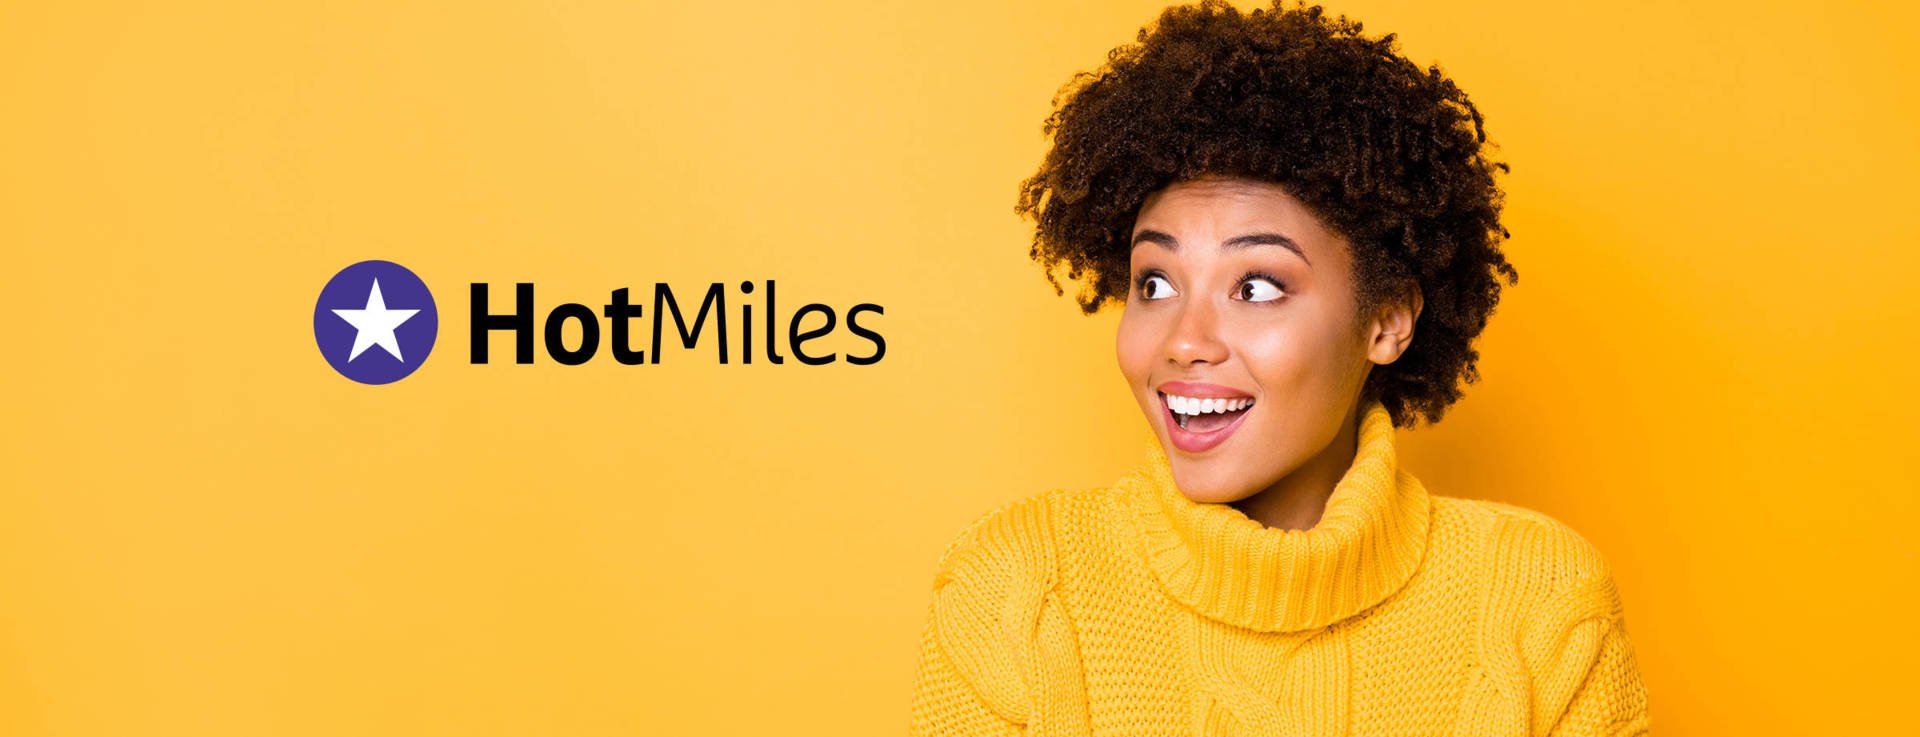 With HotMiles your stay will be even more comfortable 